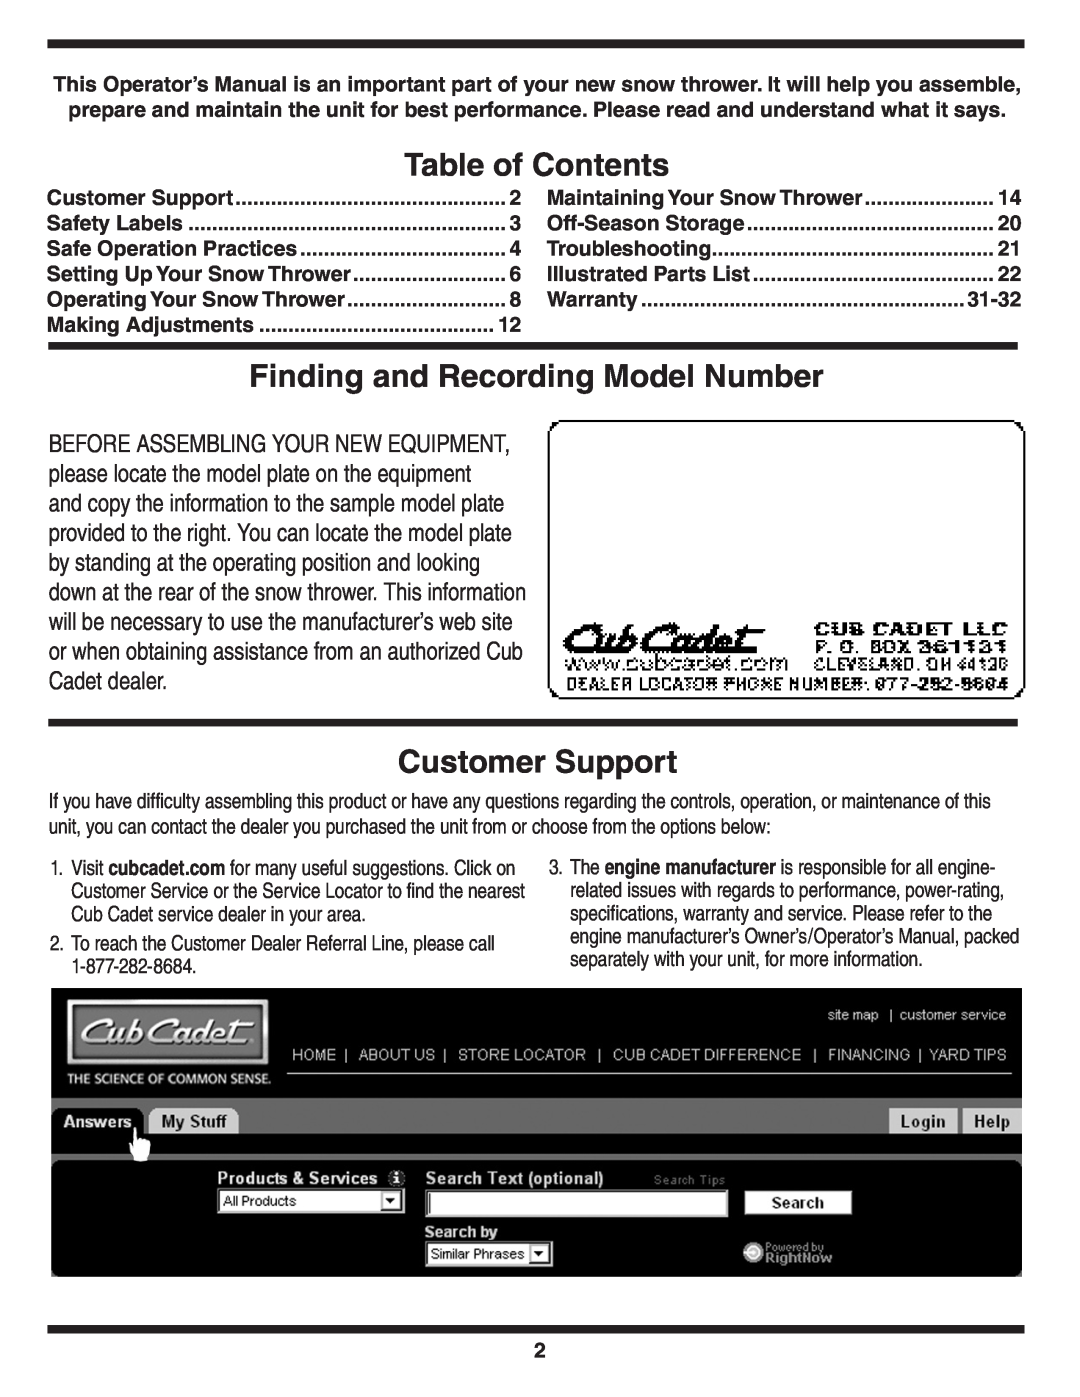 Cub Cadet WE 26 warranty Table of Contents, Finding and Recording Model Number, Customer Support 